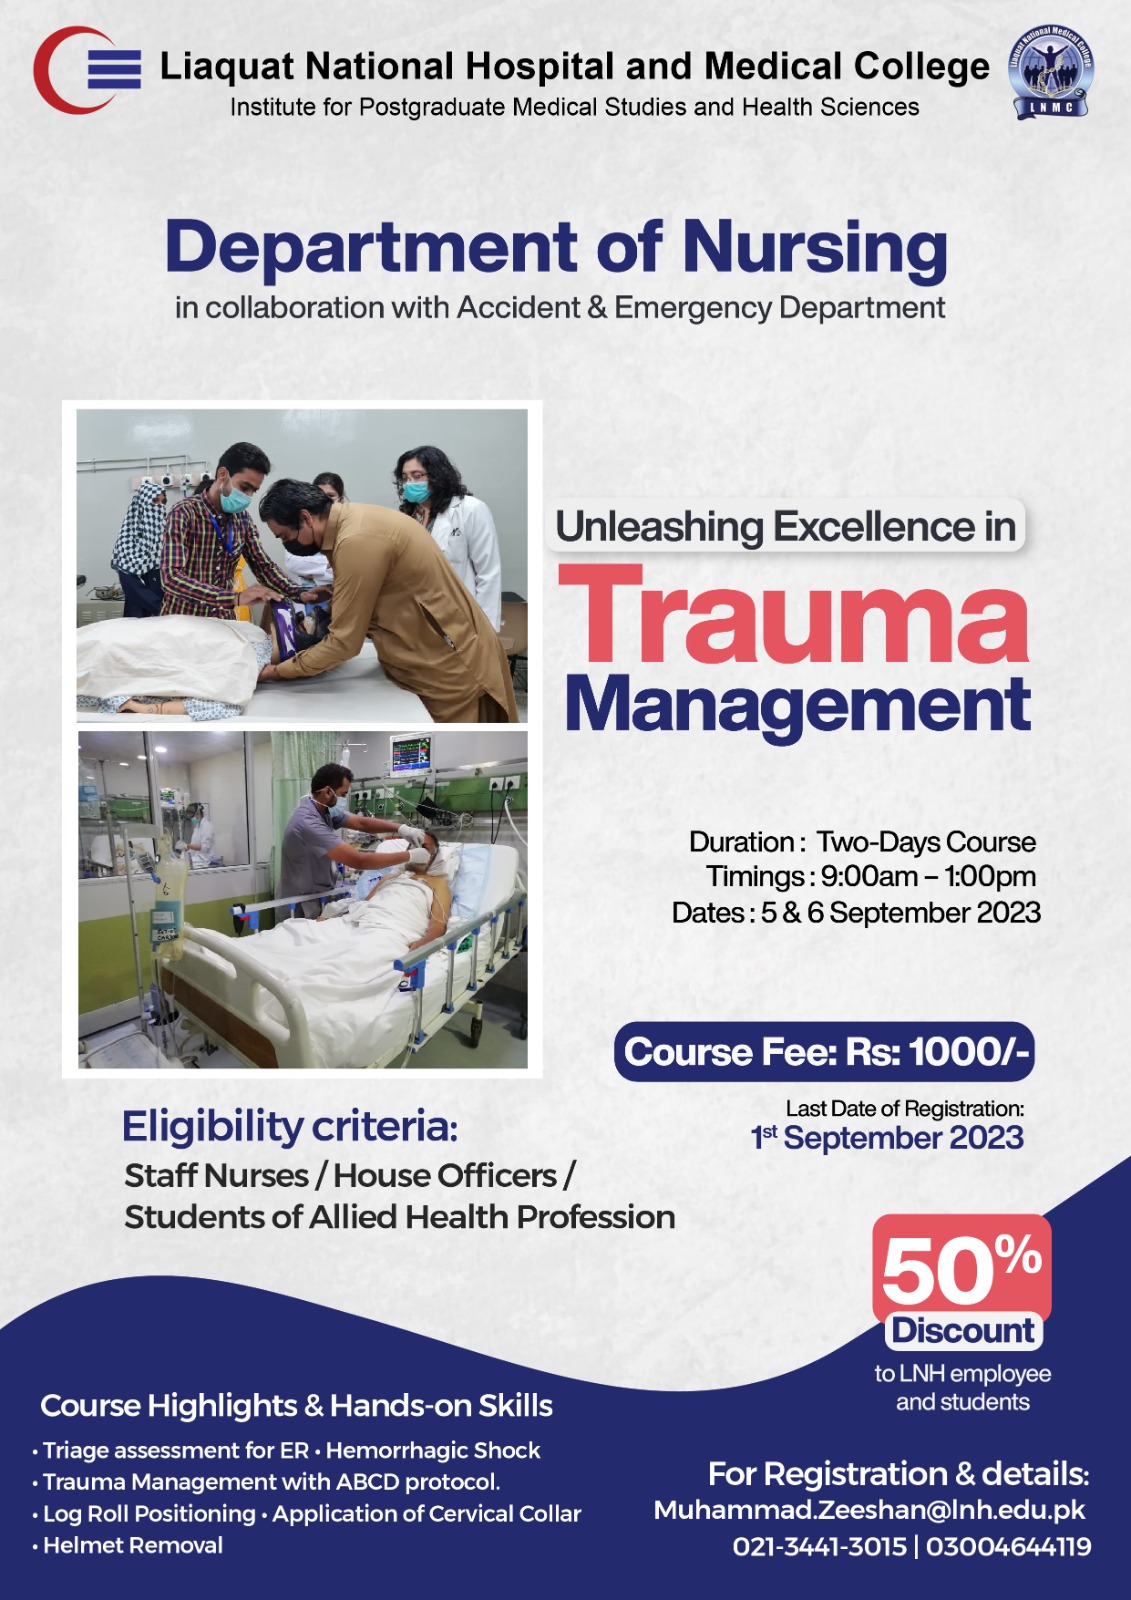 2-Day Course on Unleashing Excellence in Trauma Management